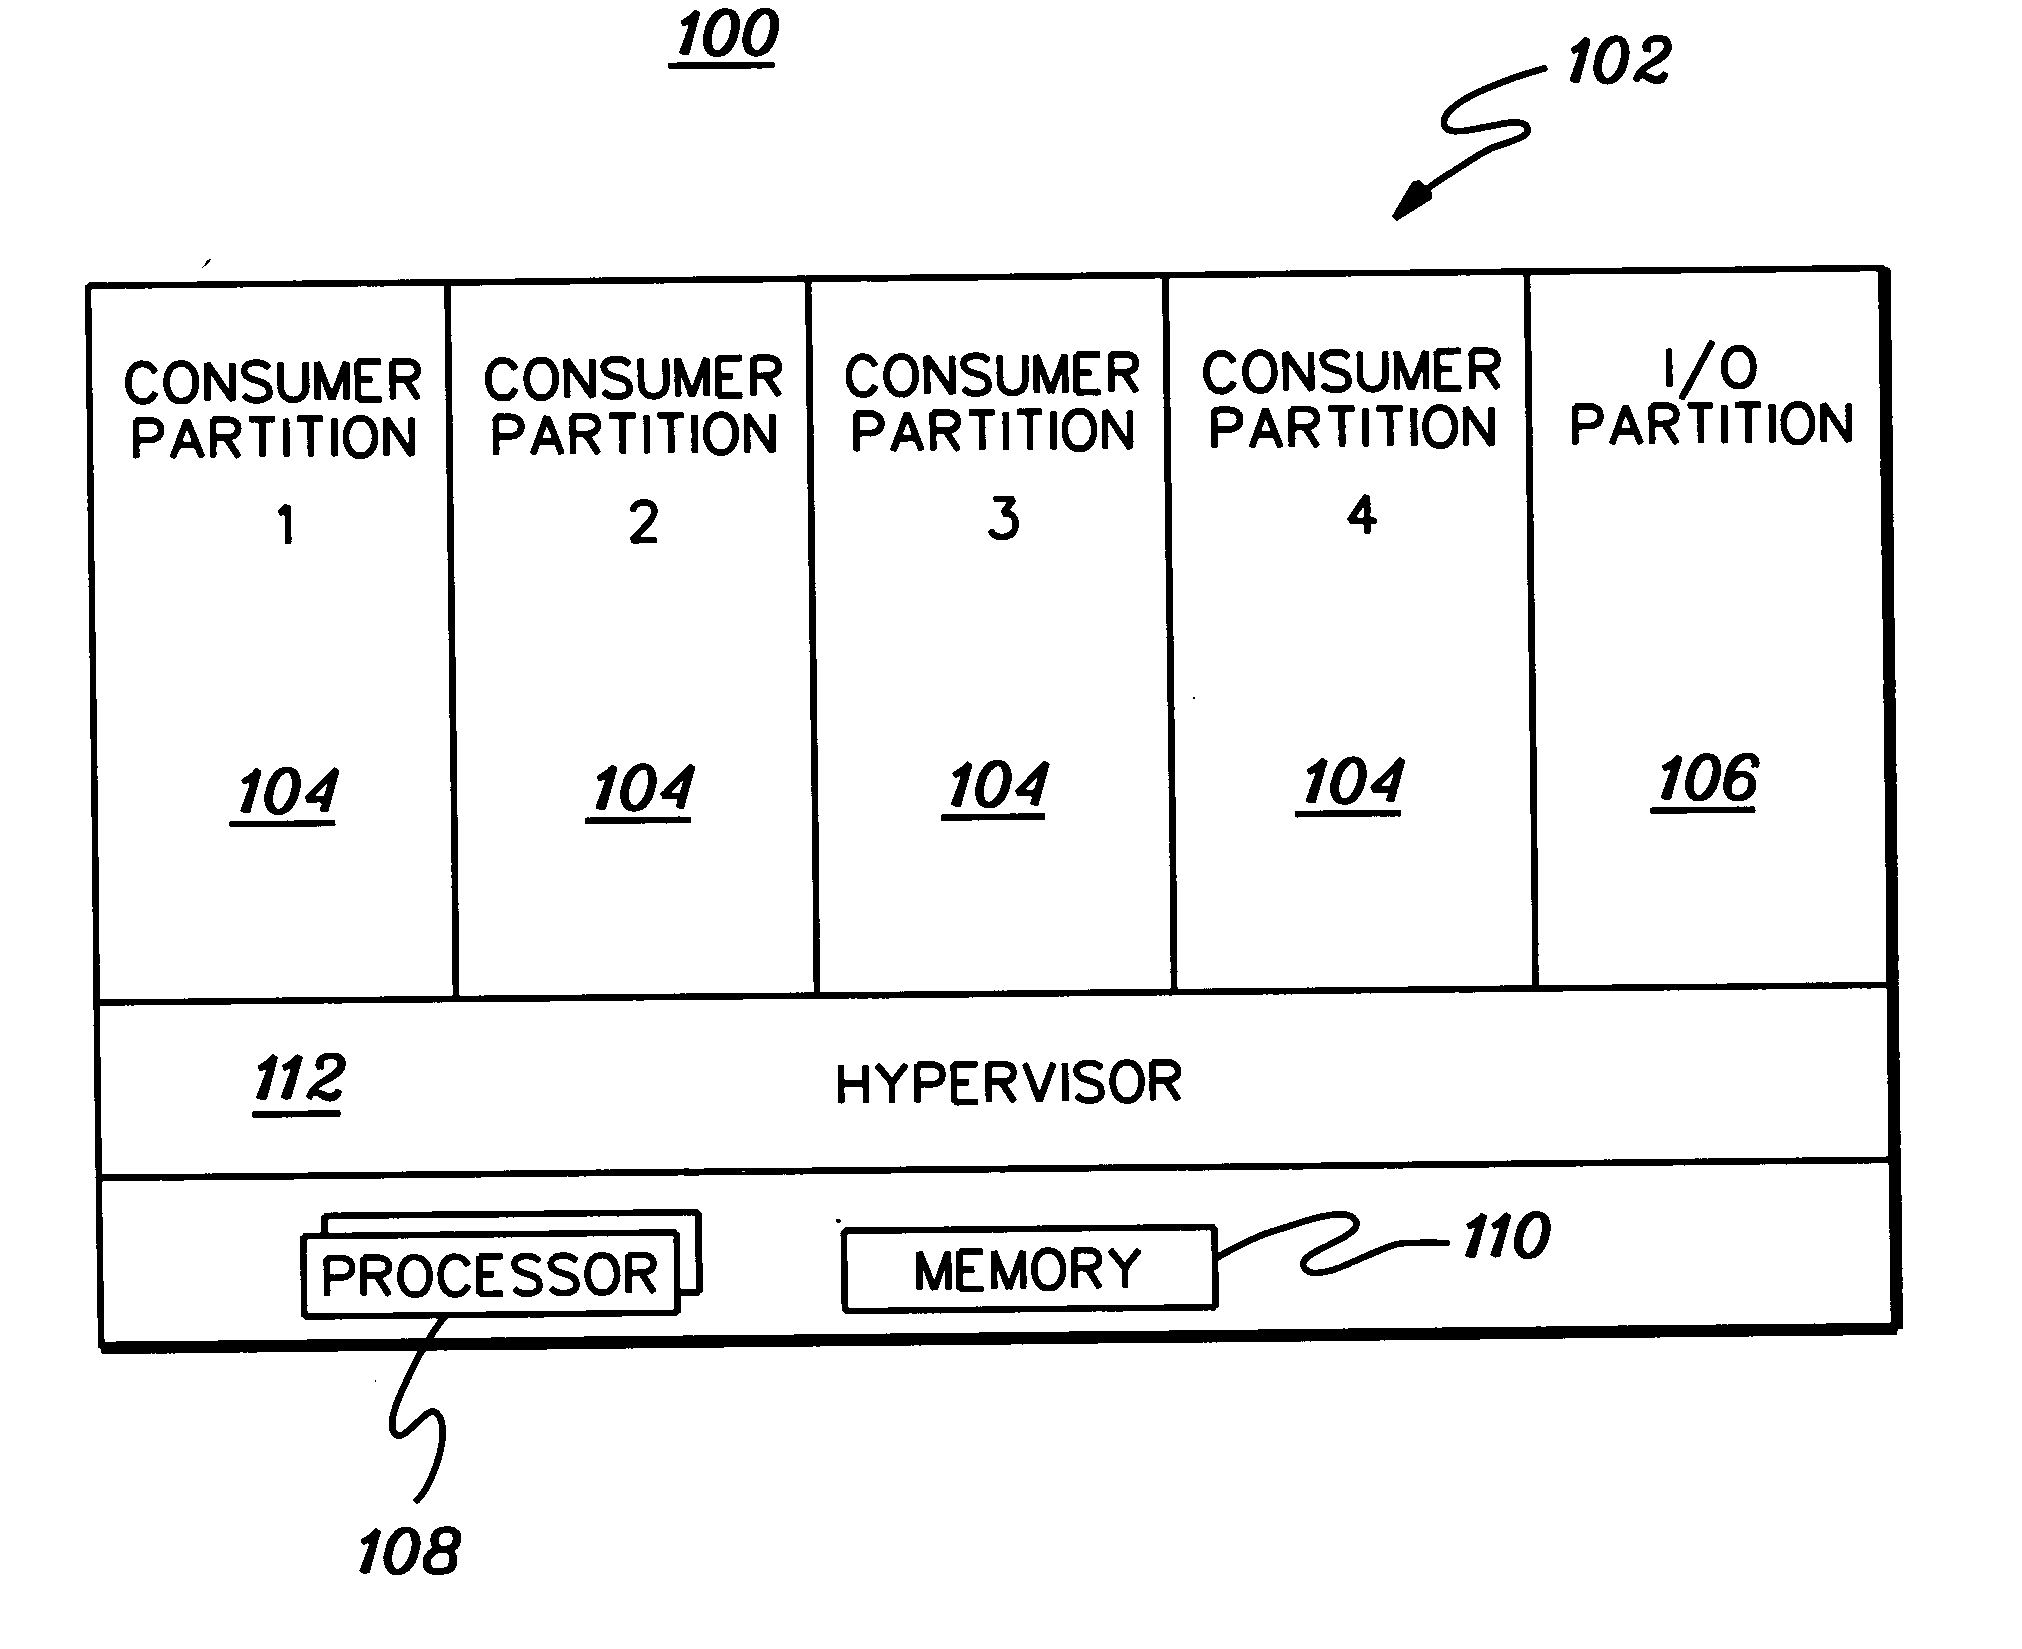 Facilitating access to input/output resources via an I/O partition shared by multiple consumer partitions